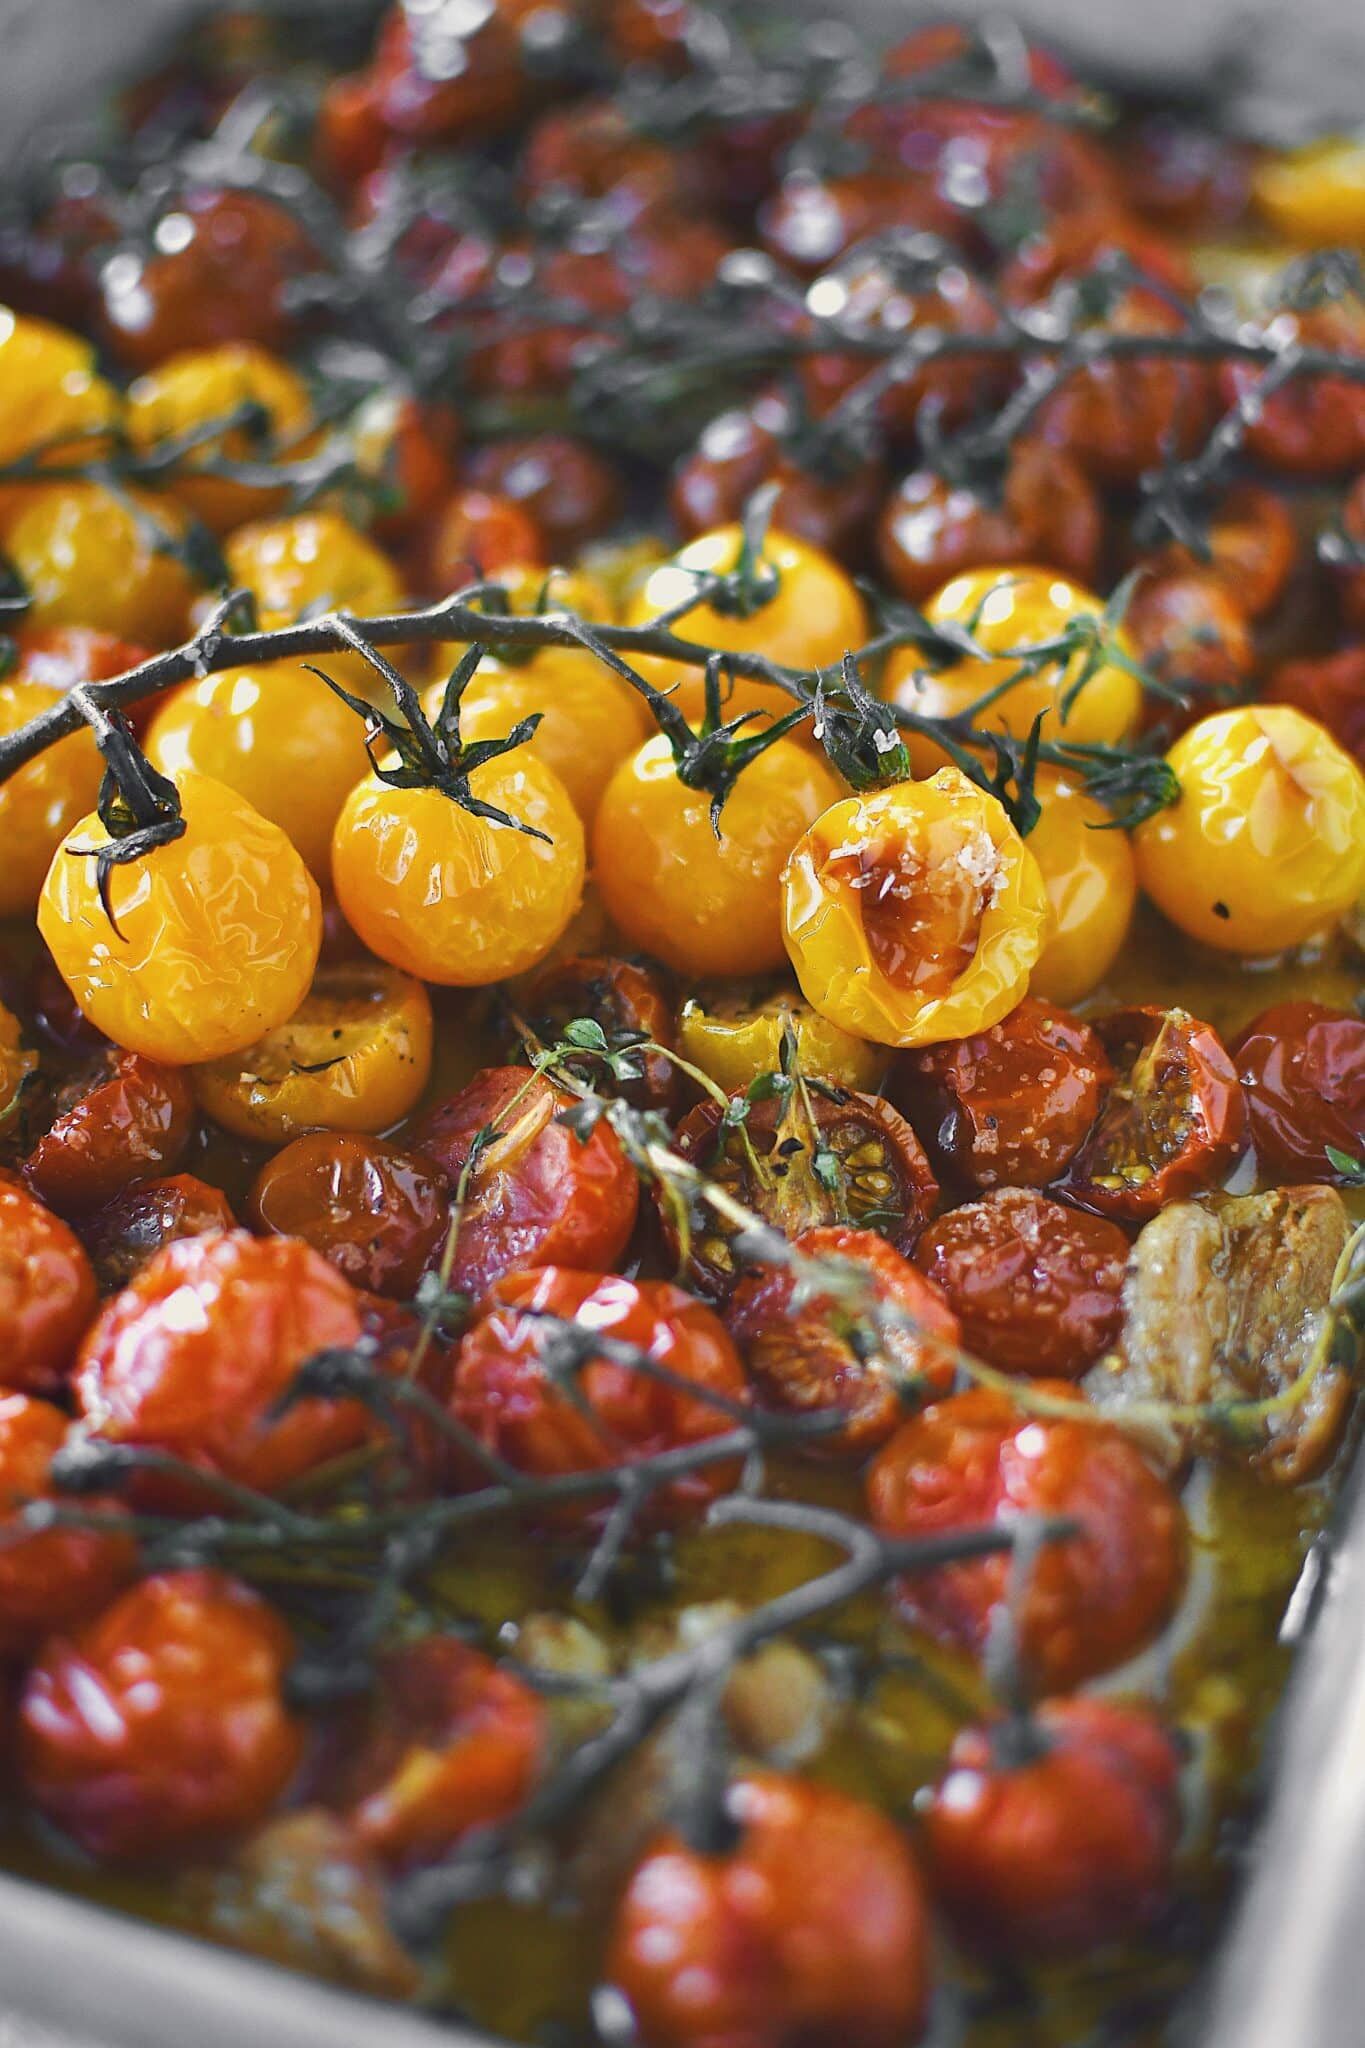 Seasoned cherry tomatoes, garlic, and herbs, after roasting.